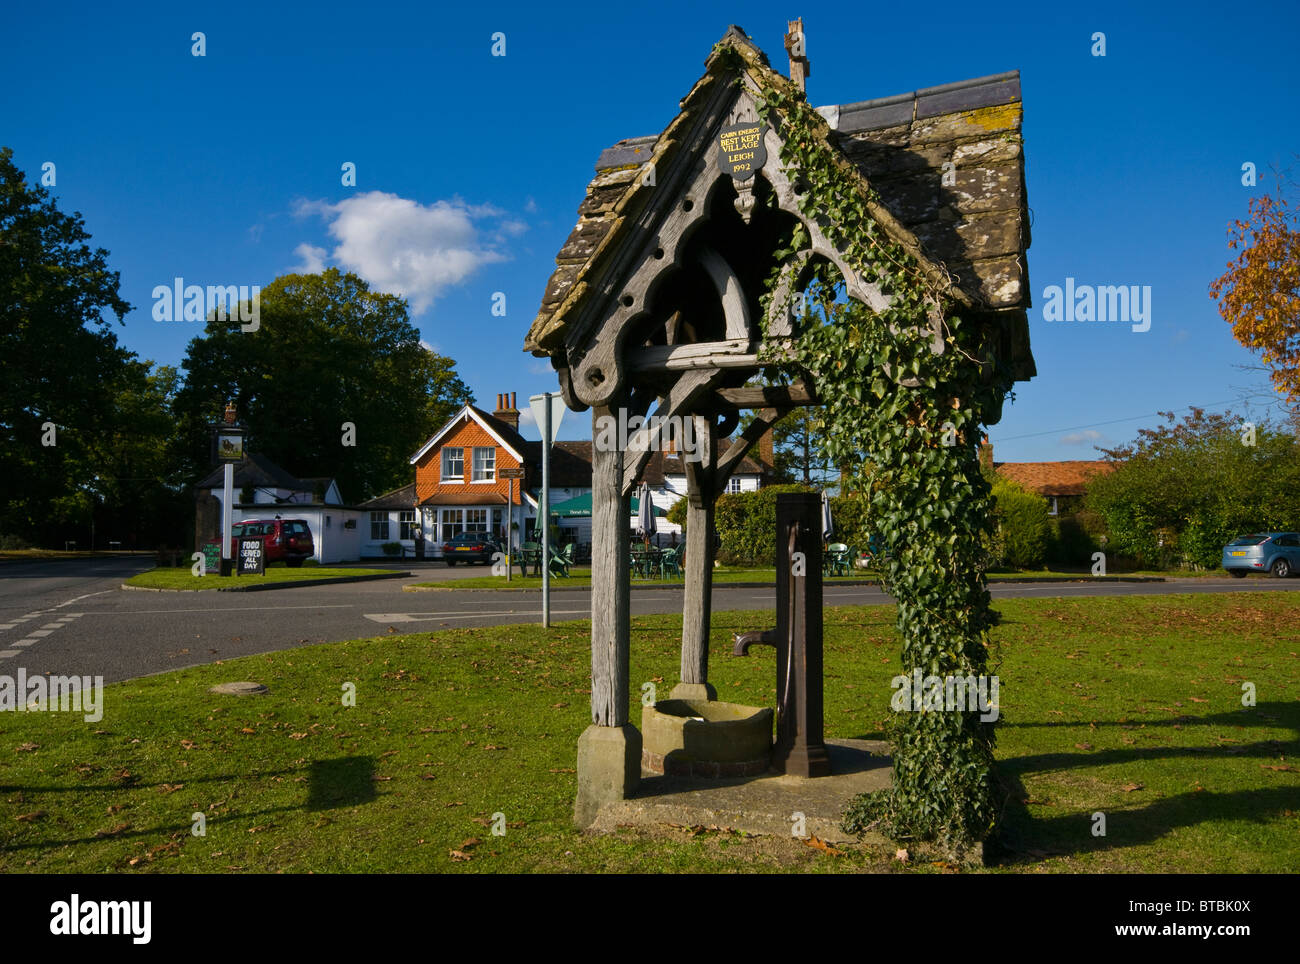 The Old Village Pump On Leigh Green With The Plough Pub In The Background Surrey England Stock Photo